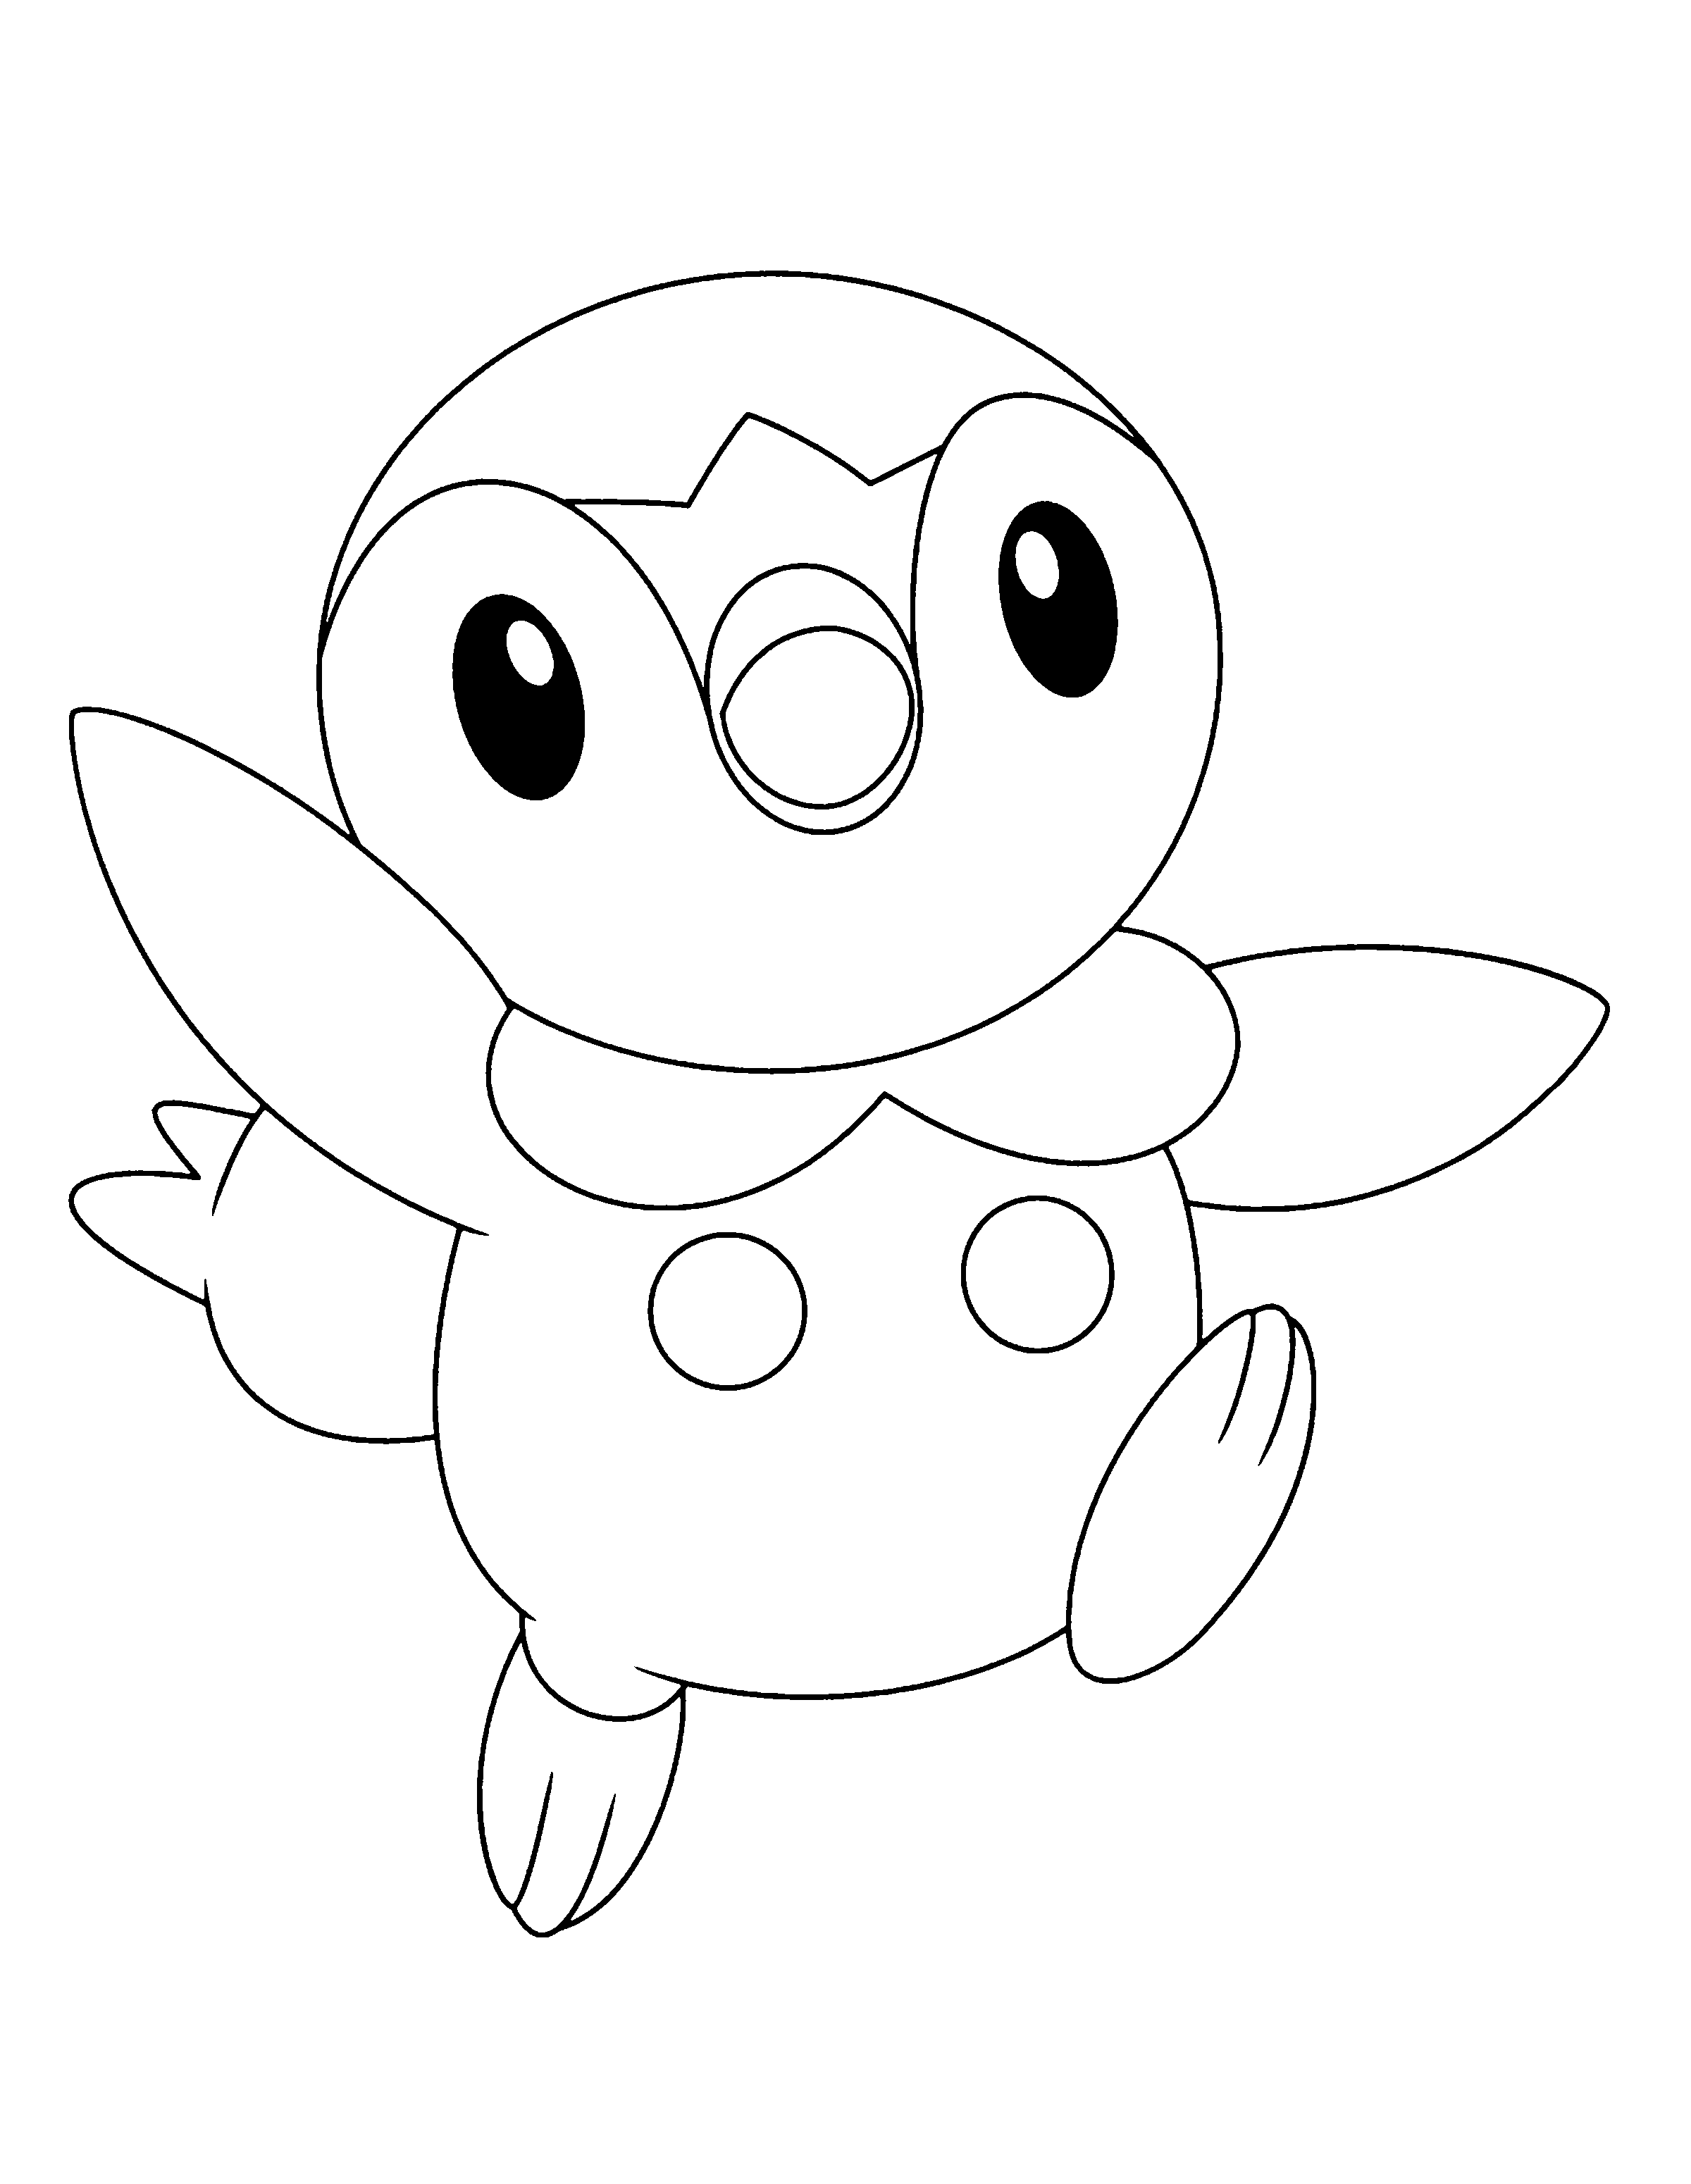 Azurill Pokemon Coloring Pages - Coloring Pages For All Ages